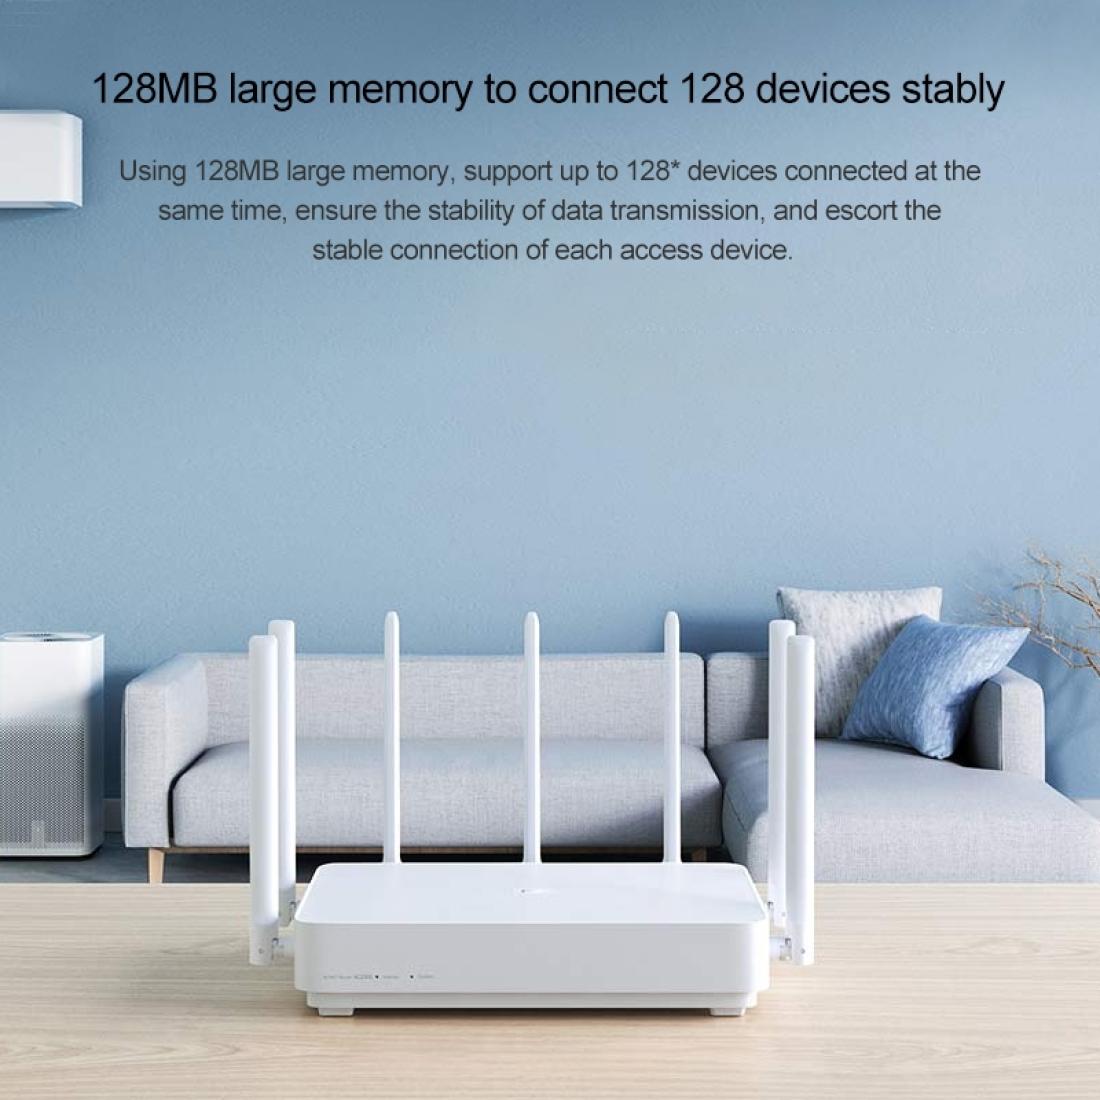 

Original Xiaomi Mi AIoT AC2350 Gigabit Router 2183Mbps 128MB Dual-Band WiFi Wireless Router with 7 High Gain Antennas Wider